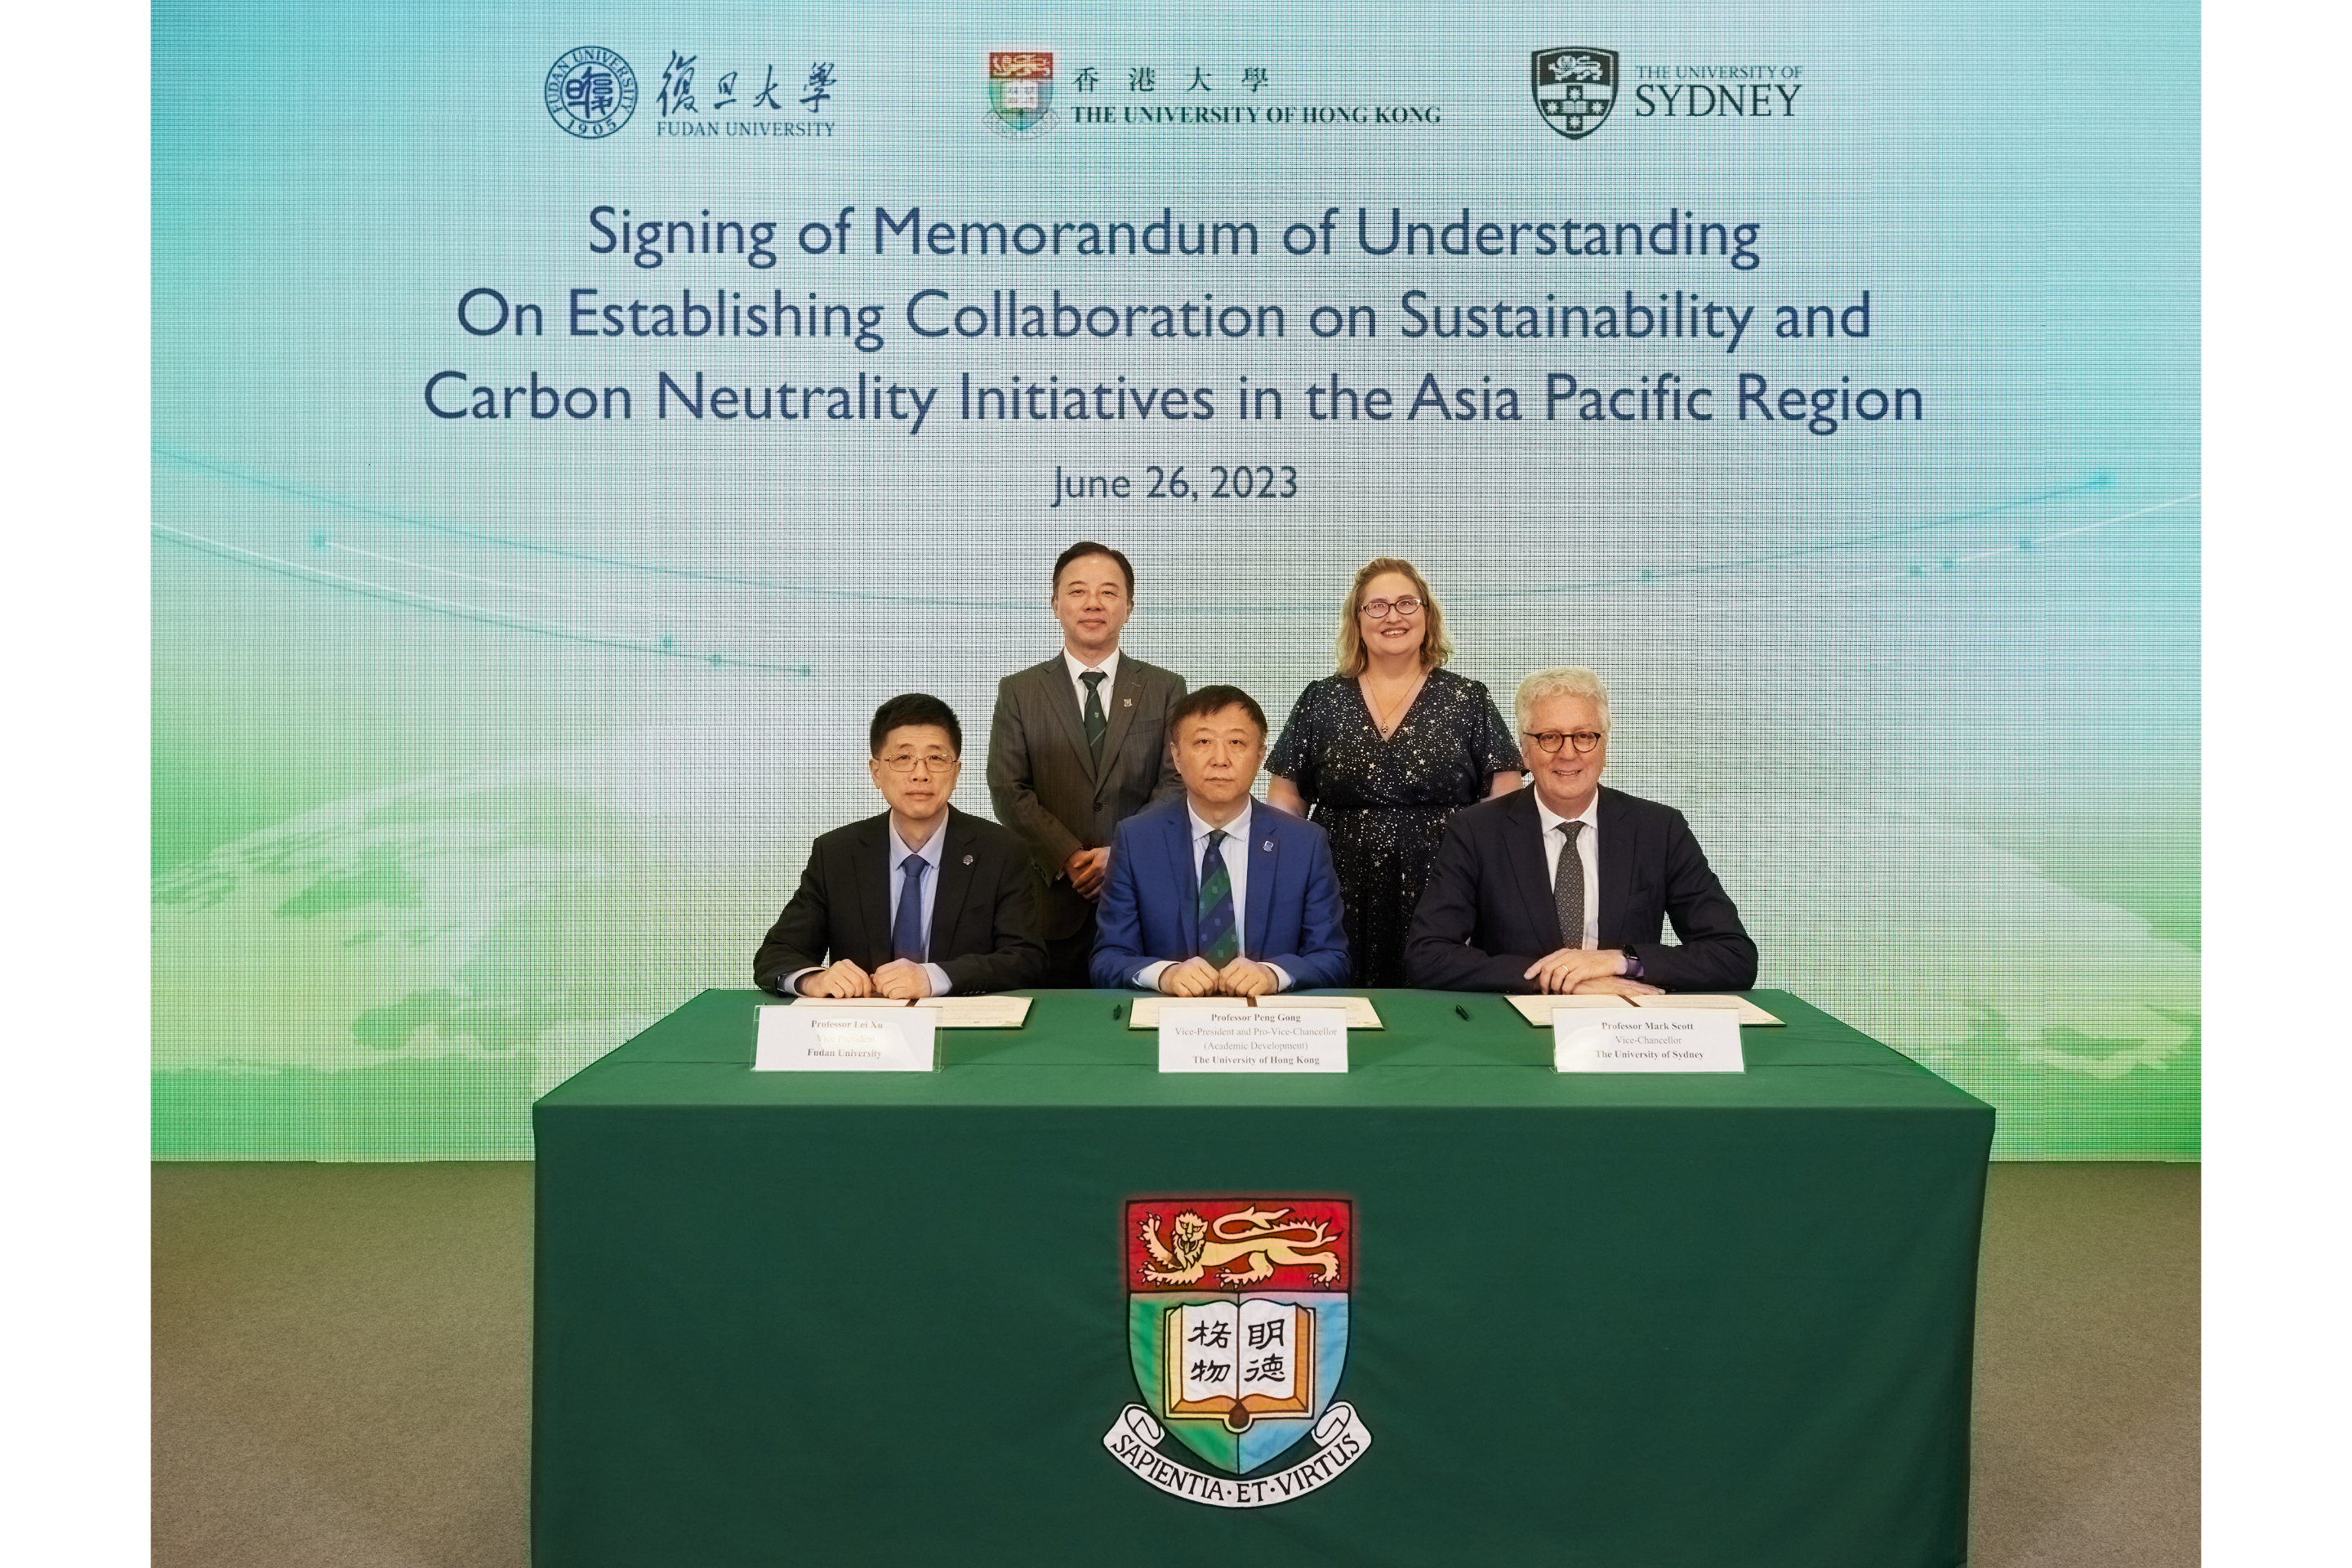 Promoting sustainability through collaboration: The University of Hong Kong joins hands with Fudan University and the University of Sydney to advance research and education programmes.